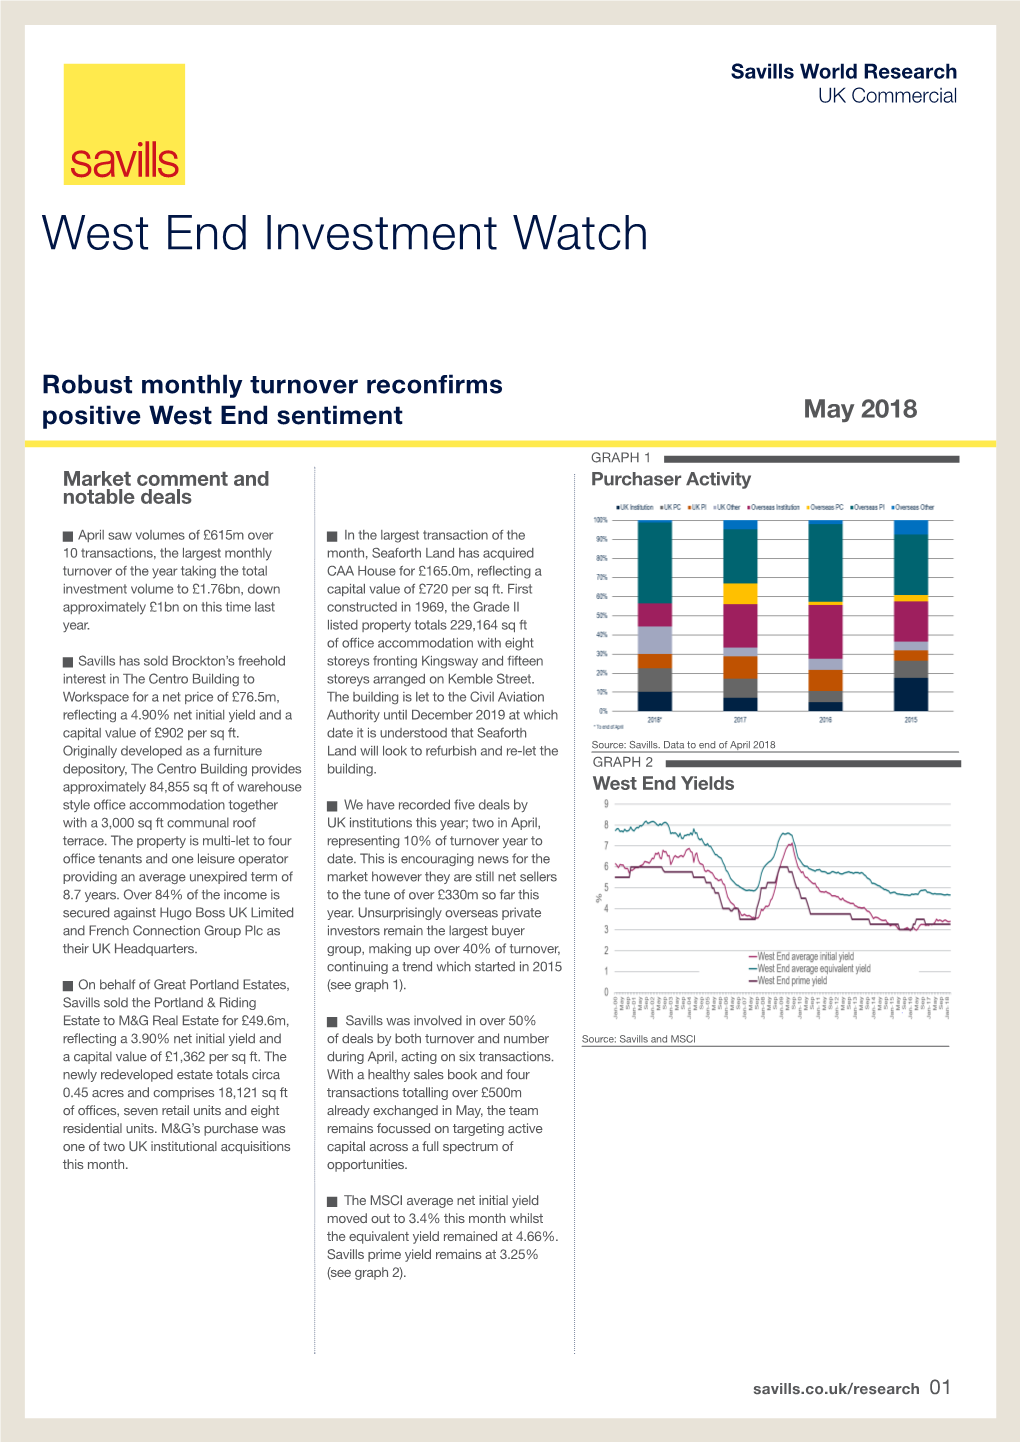 West End Investment Watch